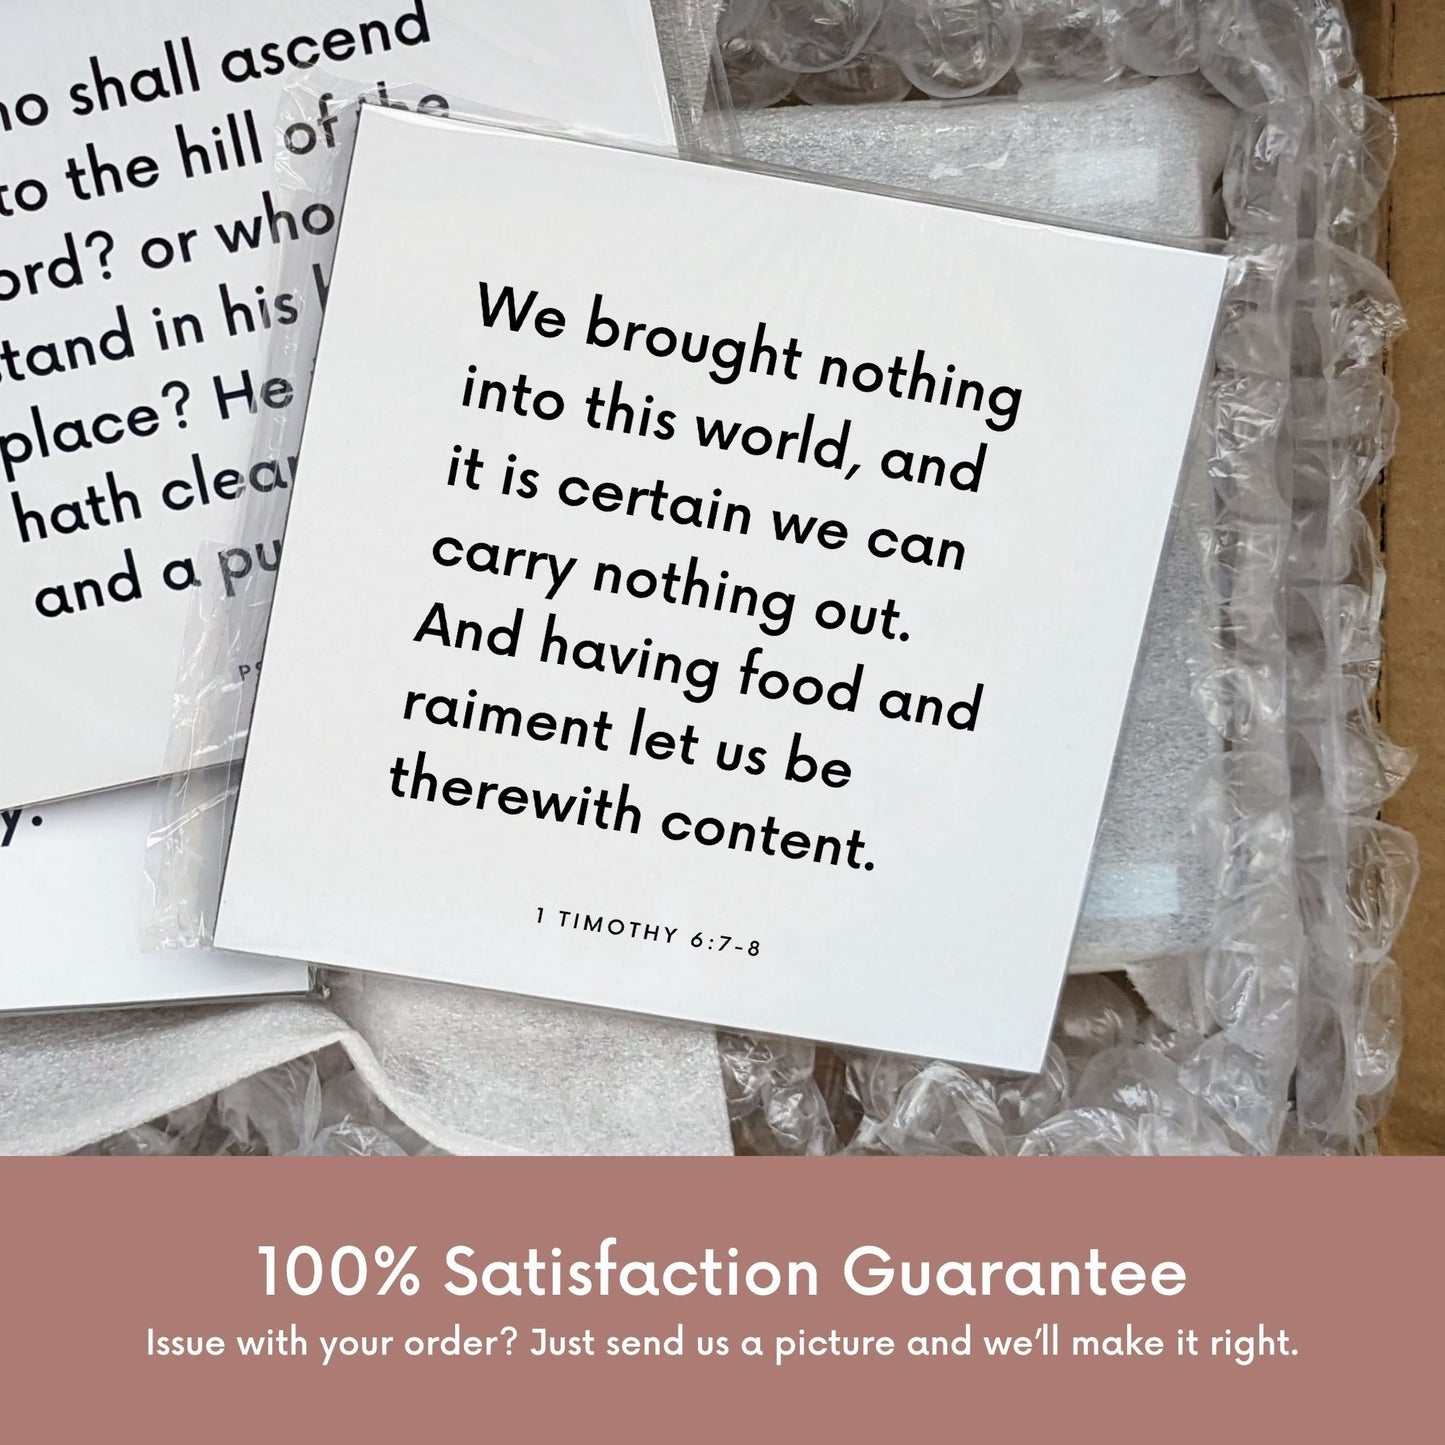 Shipping materials for scripture tile of 1 Timothy 6:7-8 - "Having food and raiment let us be therewith content"